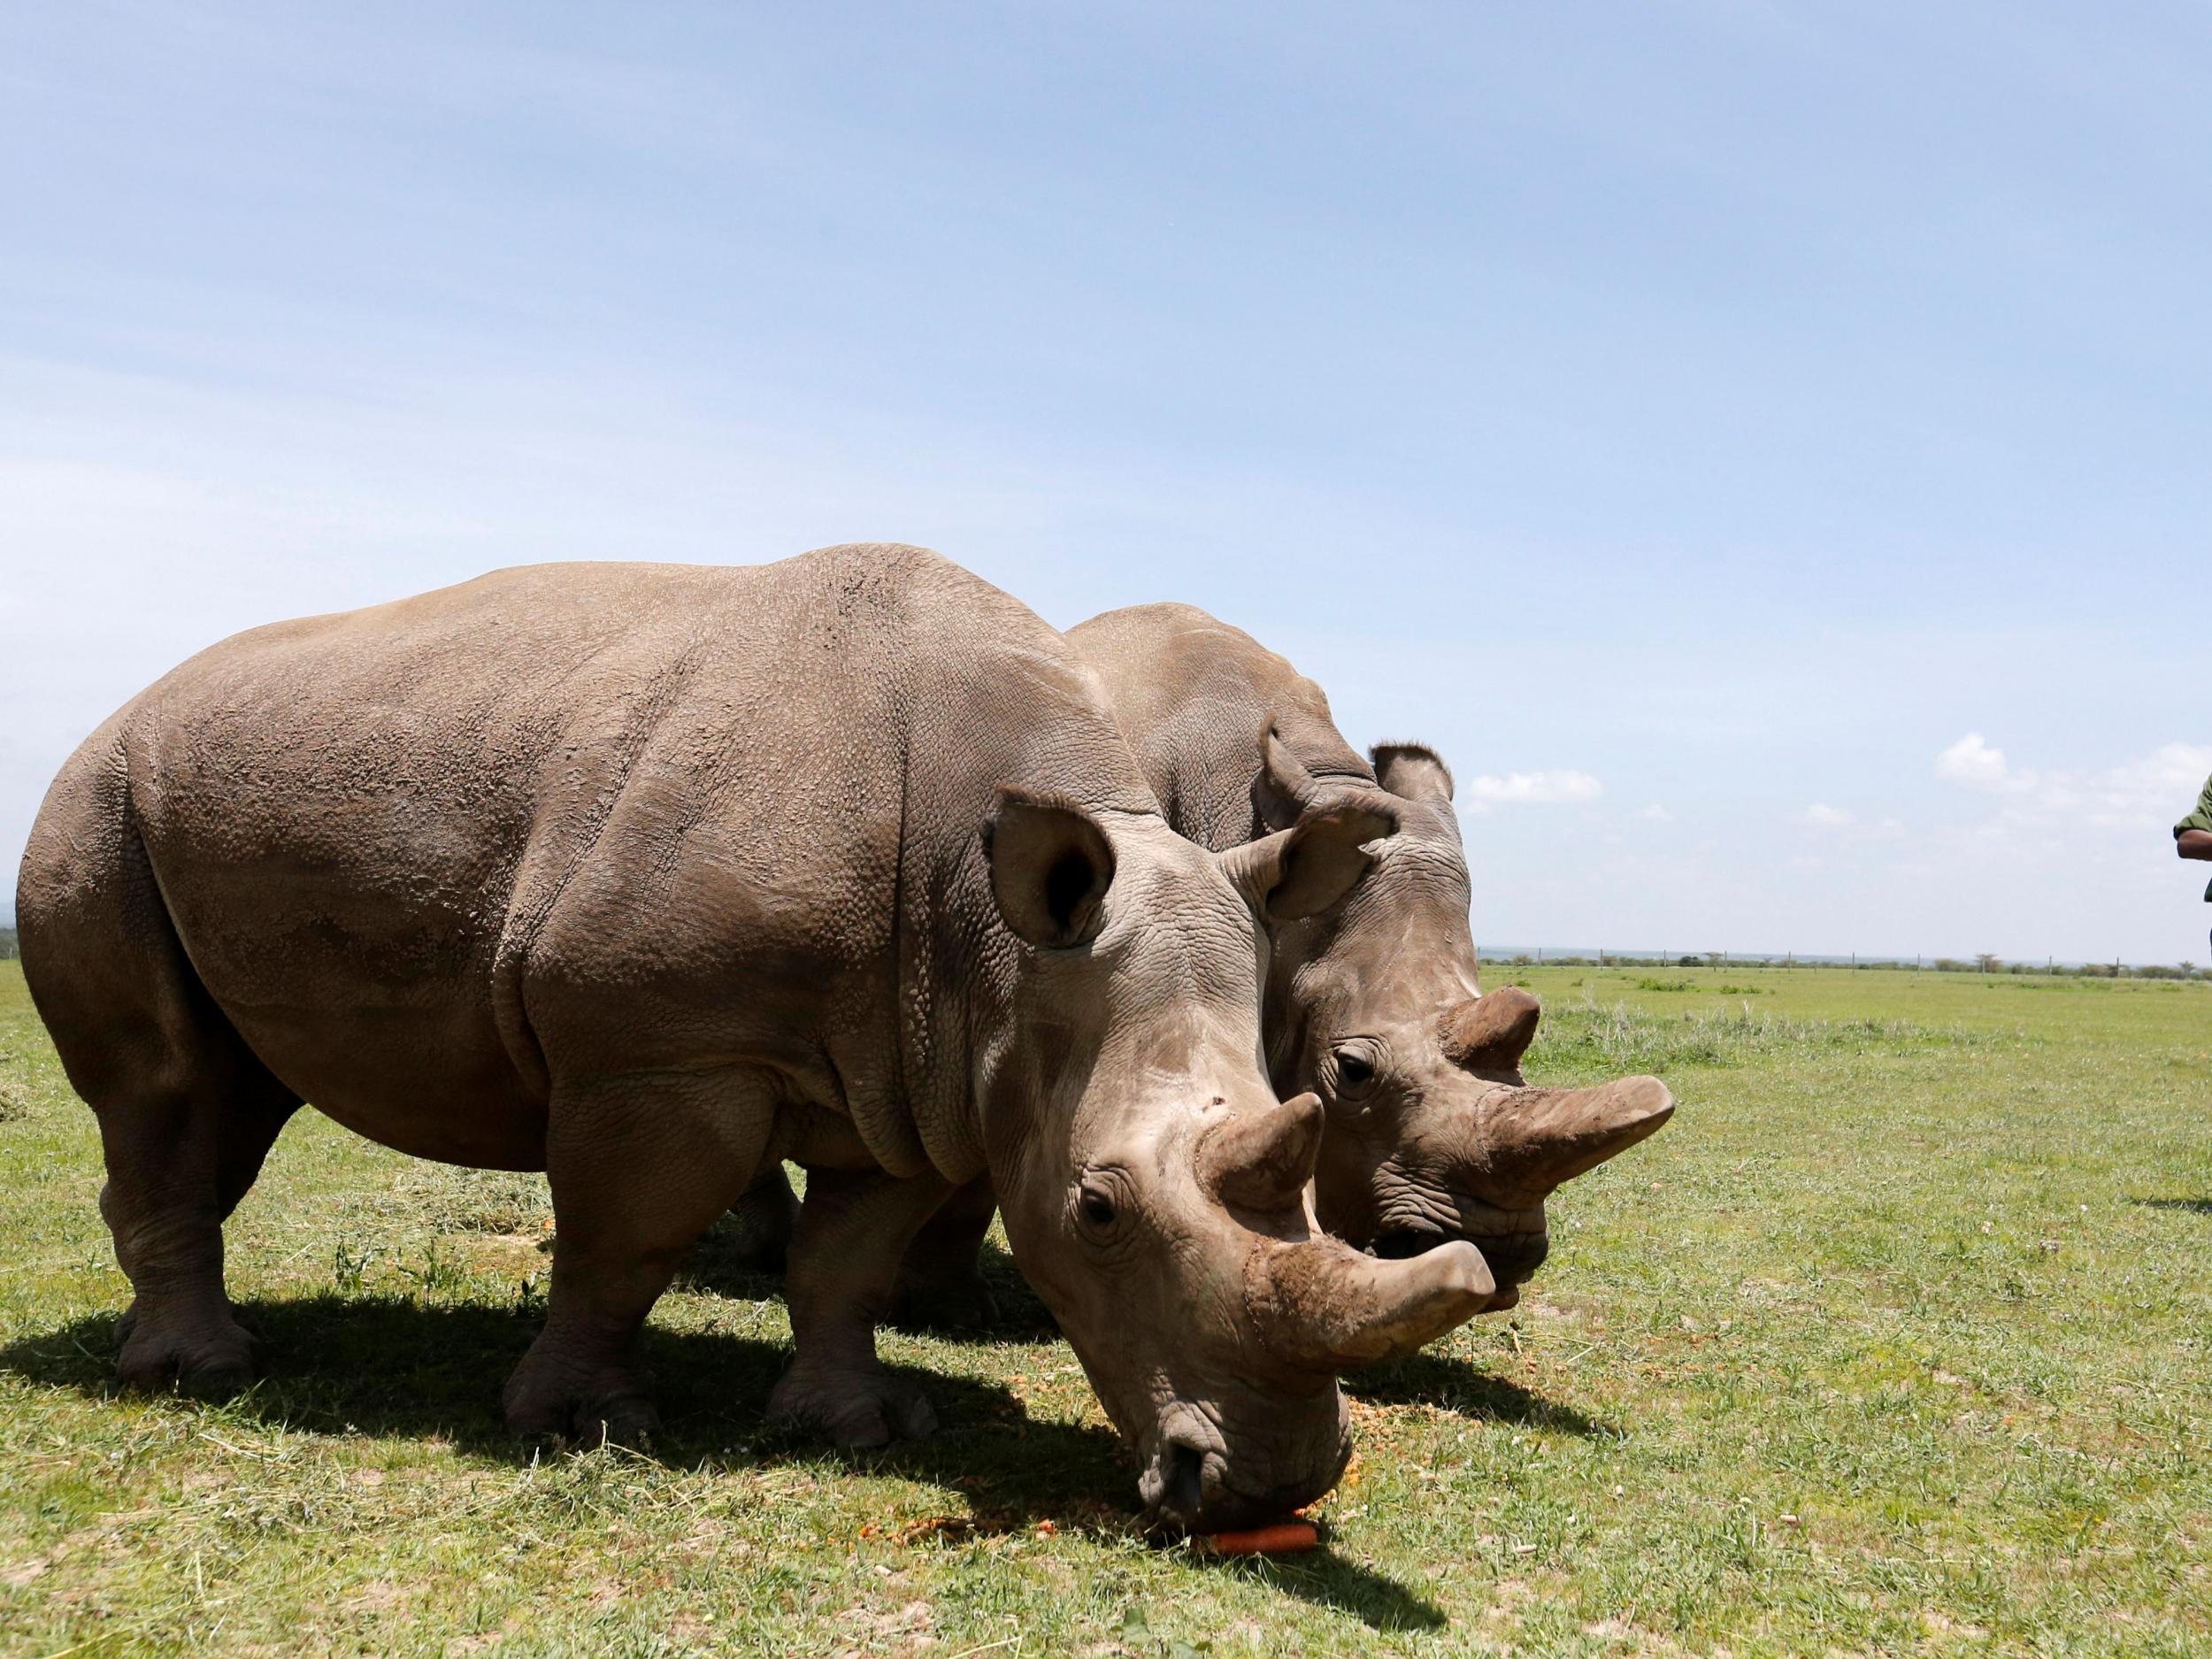 Najin and her daughter Fatou, the last two northern white rhino females, graze near their enclosure at the Ol Pejeta Conservancy in Laikipia National Park, Kenya